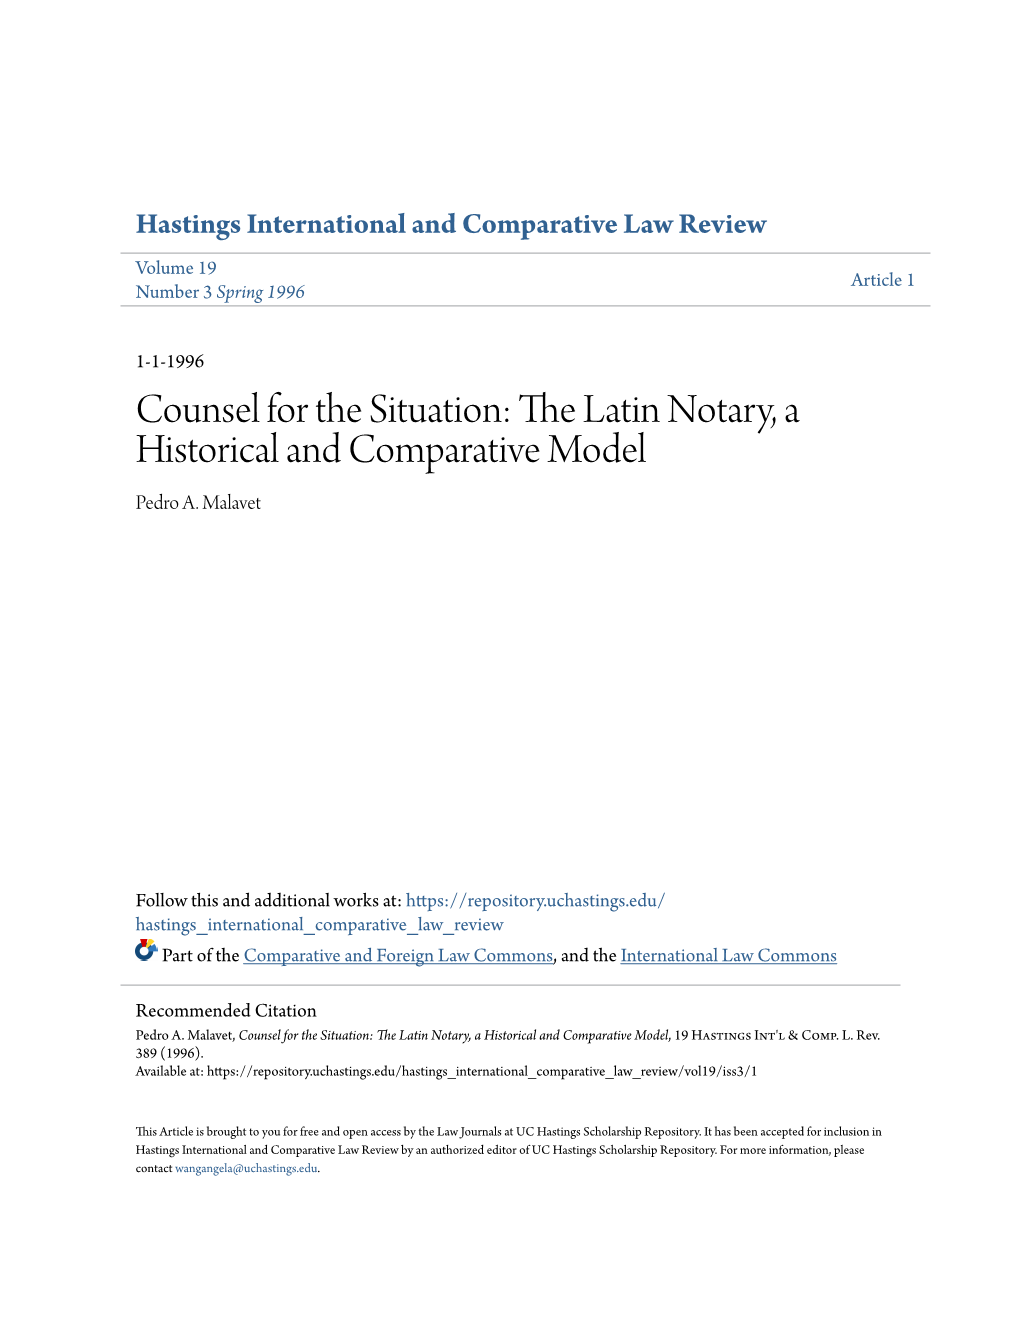 The Latin Notary, a Historical and Comparative Model Pedro A